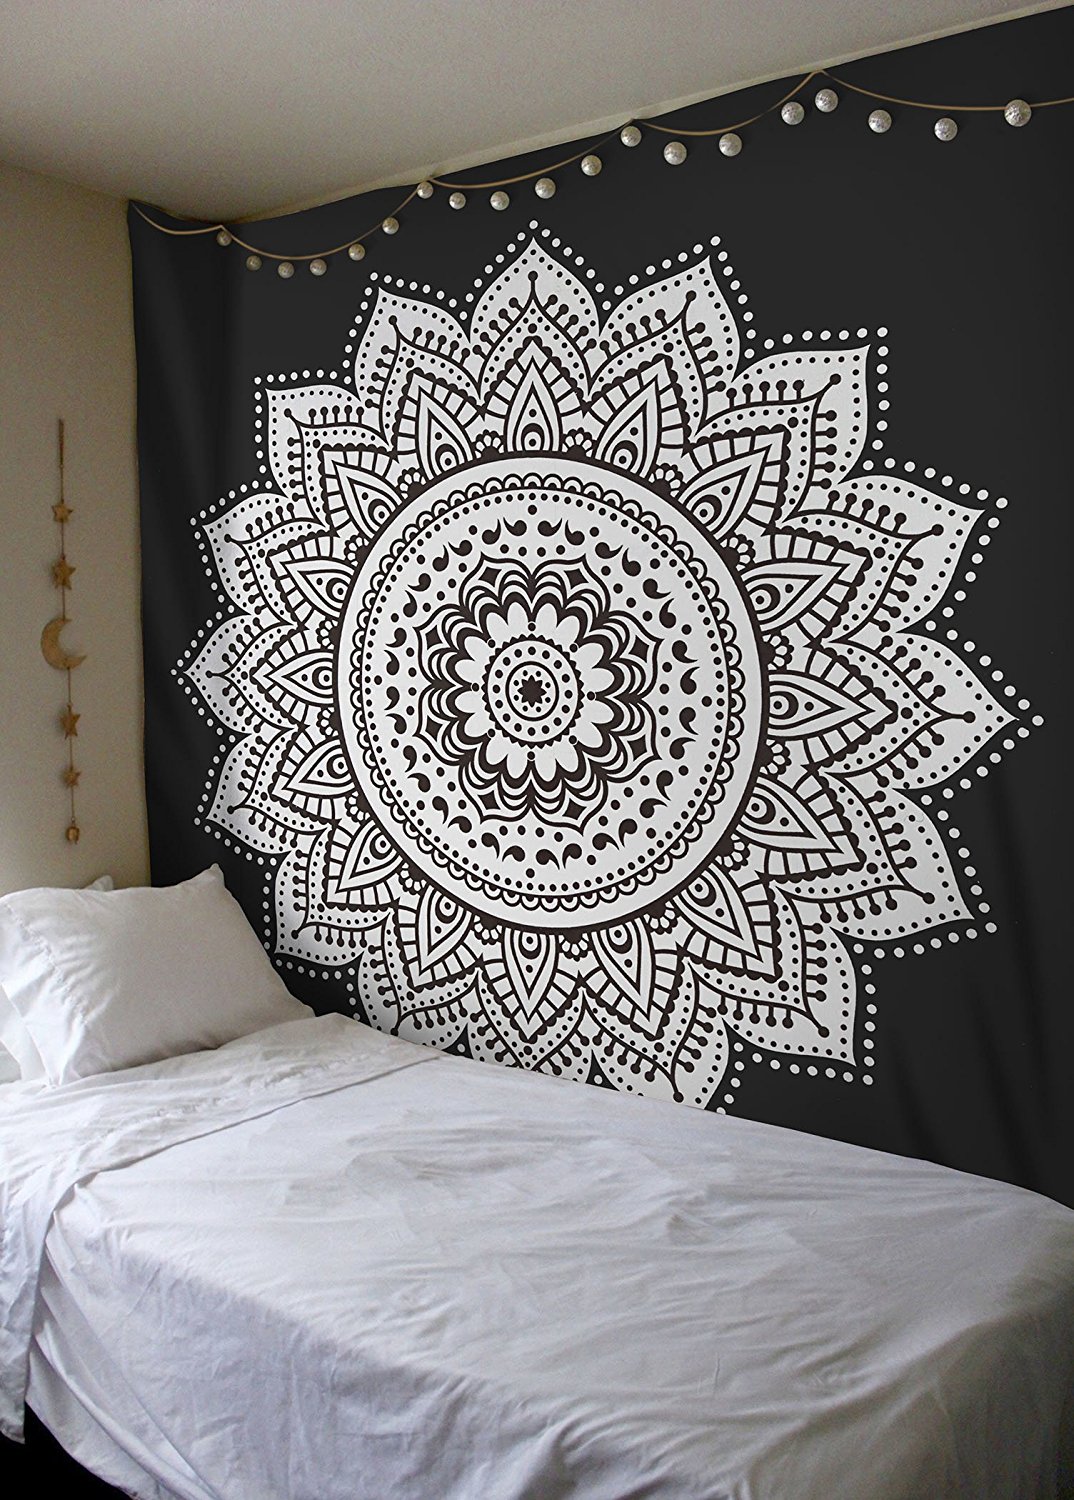 15 +brilliant ideas for using your wall tapestry in an innovative way